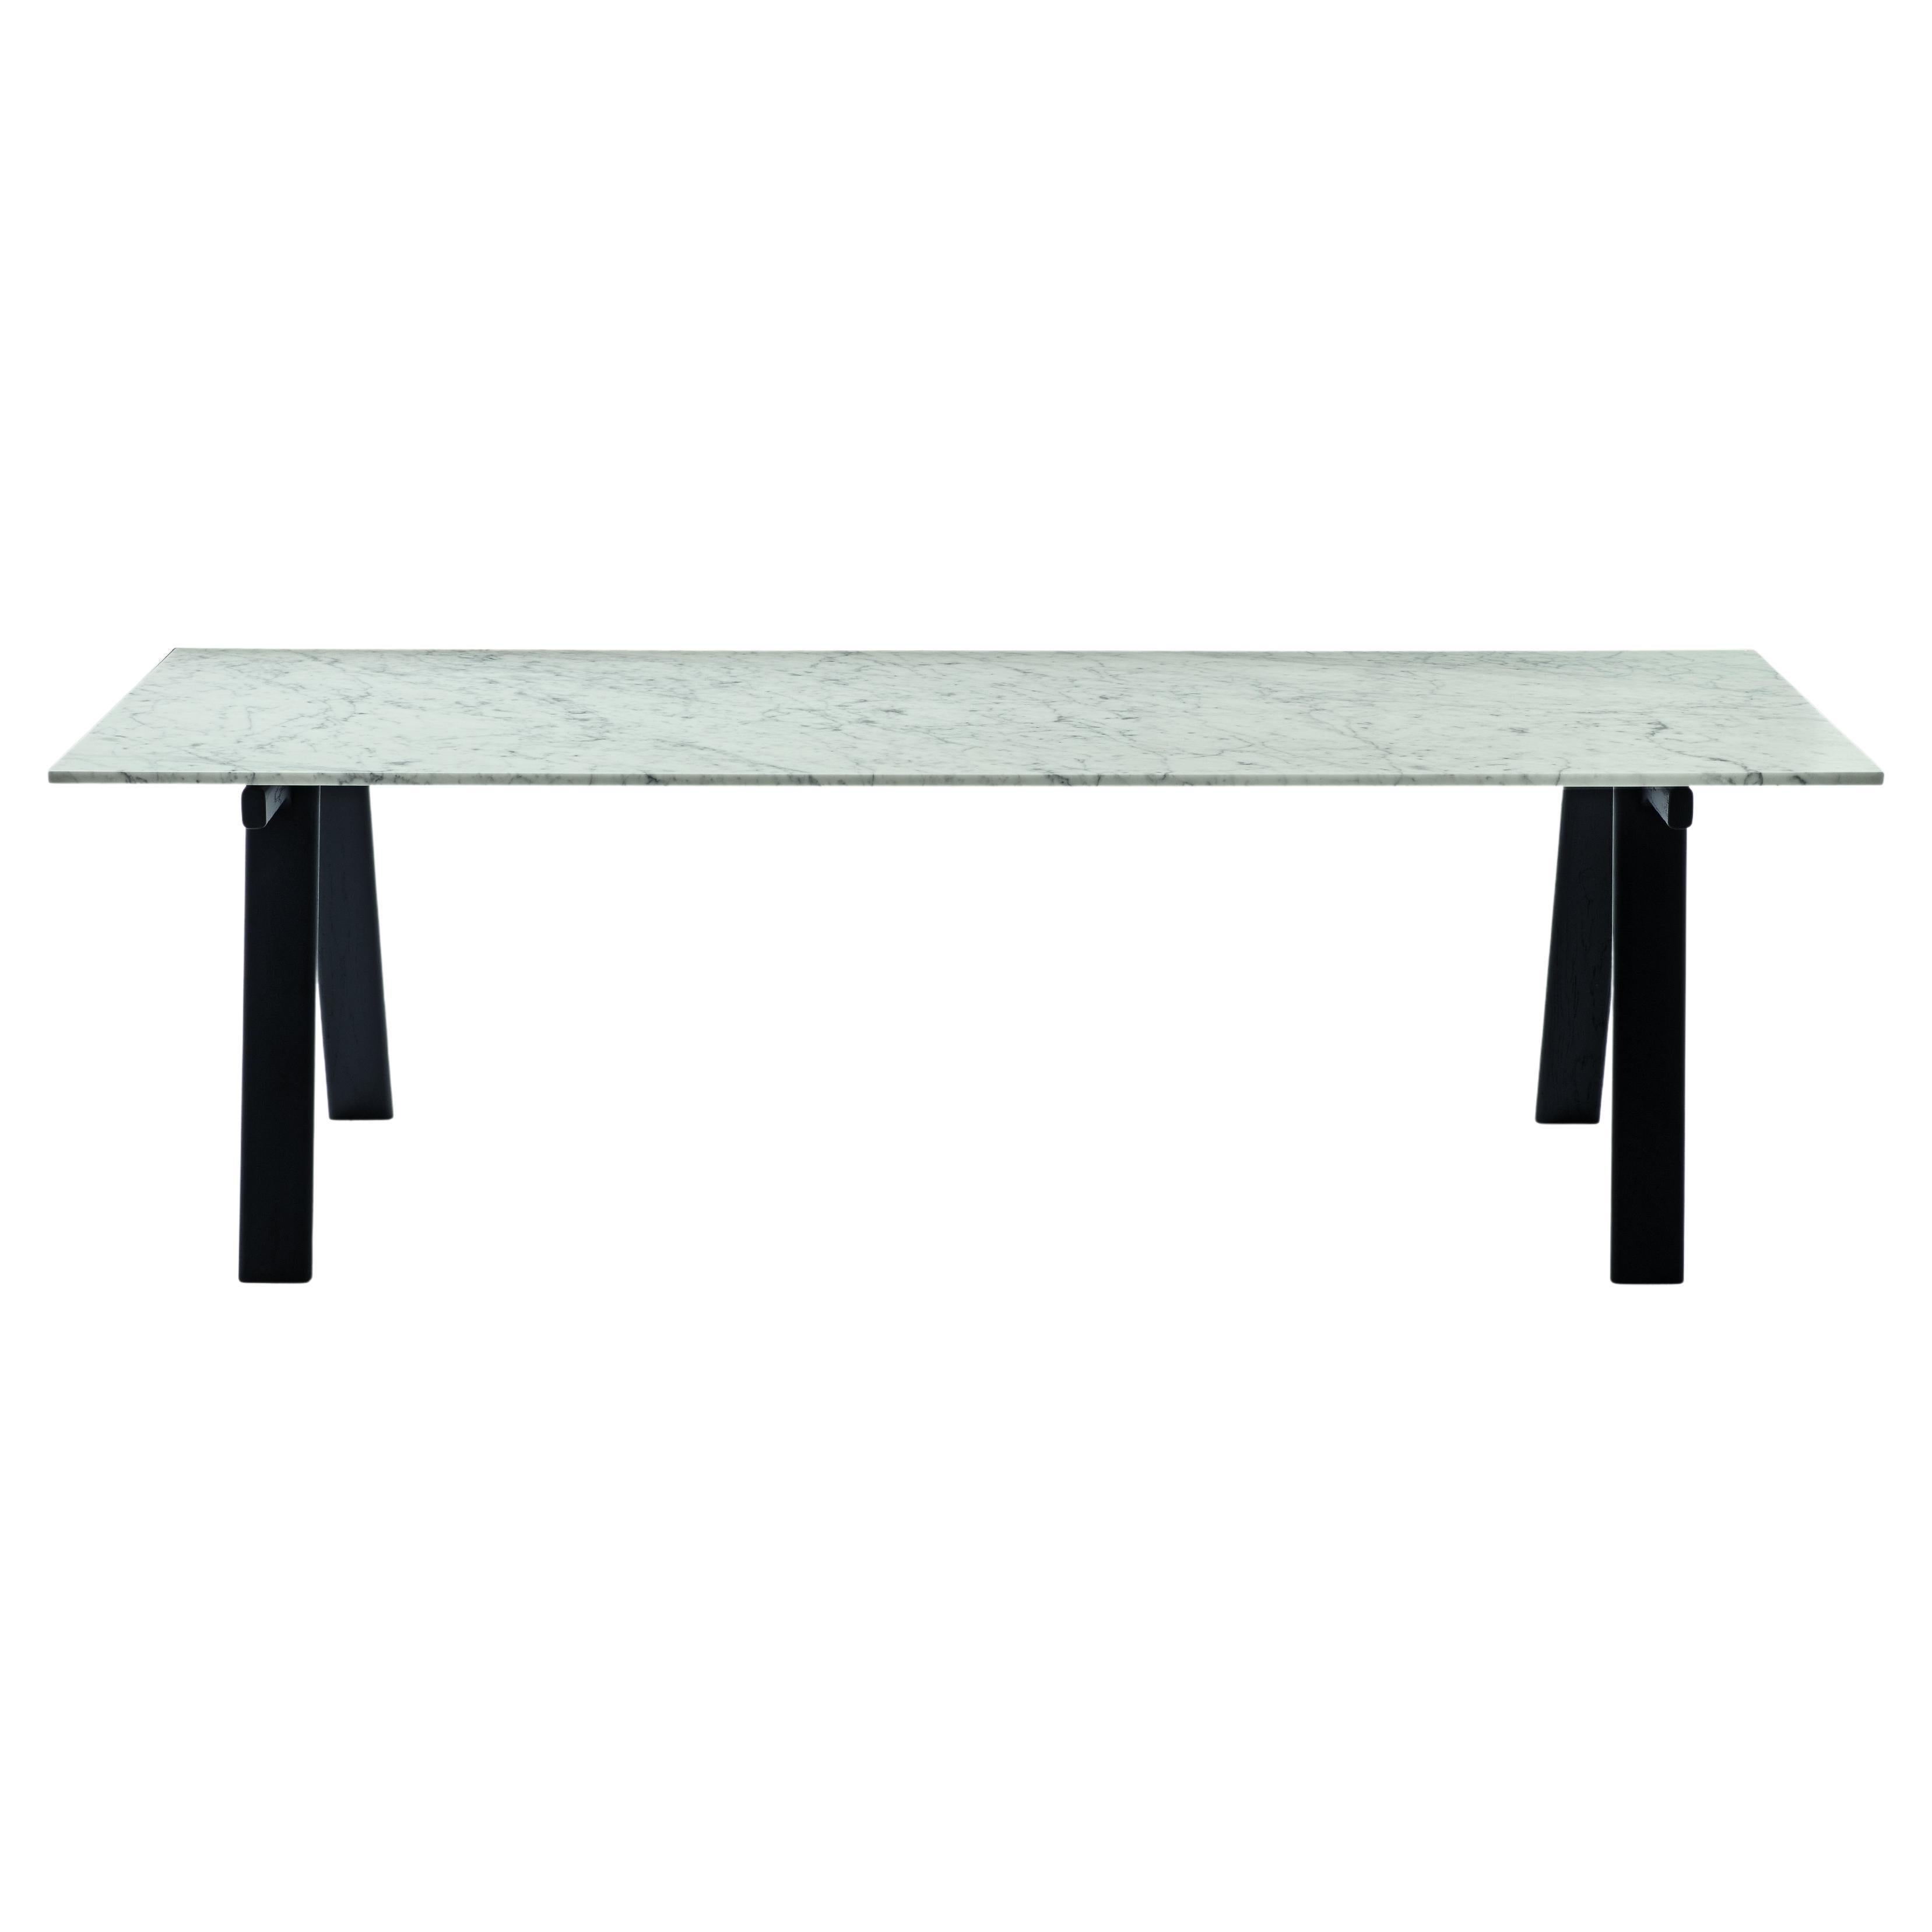 Zanotta Large Ambrosiano Table in Carrara Marble Top with Black Frame by Mist-o